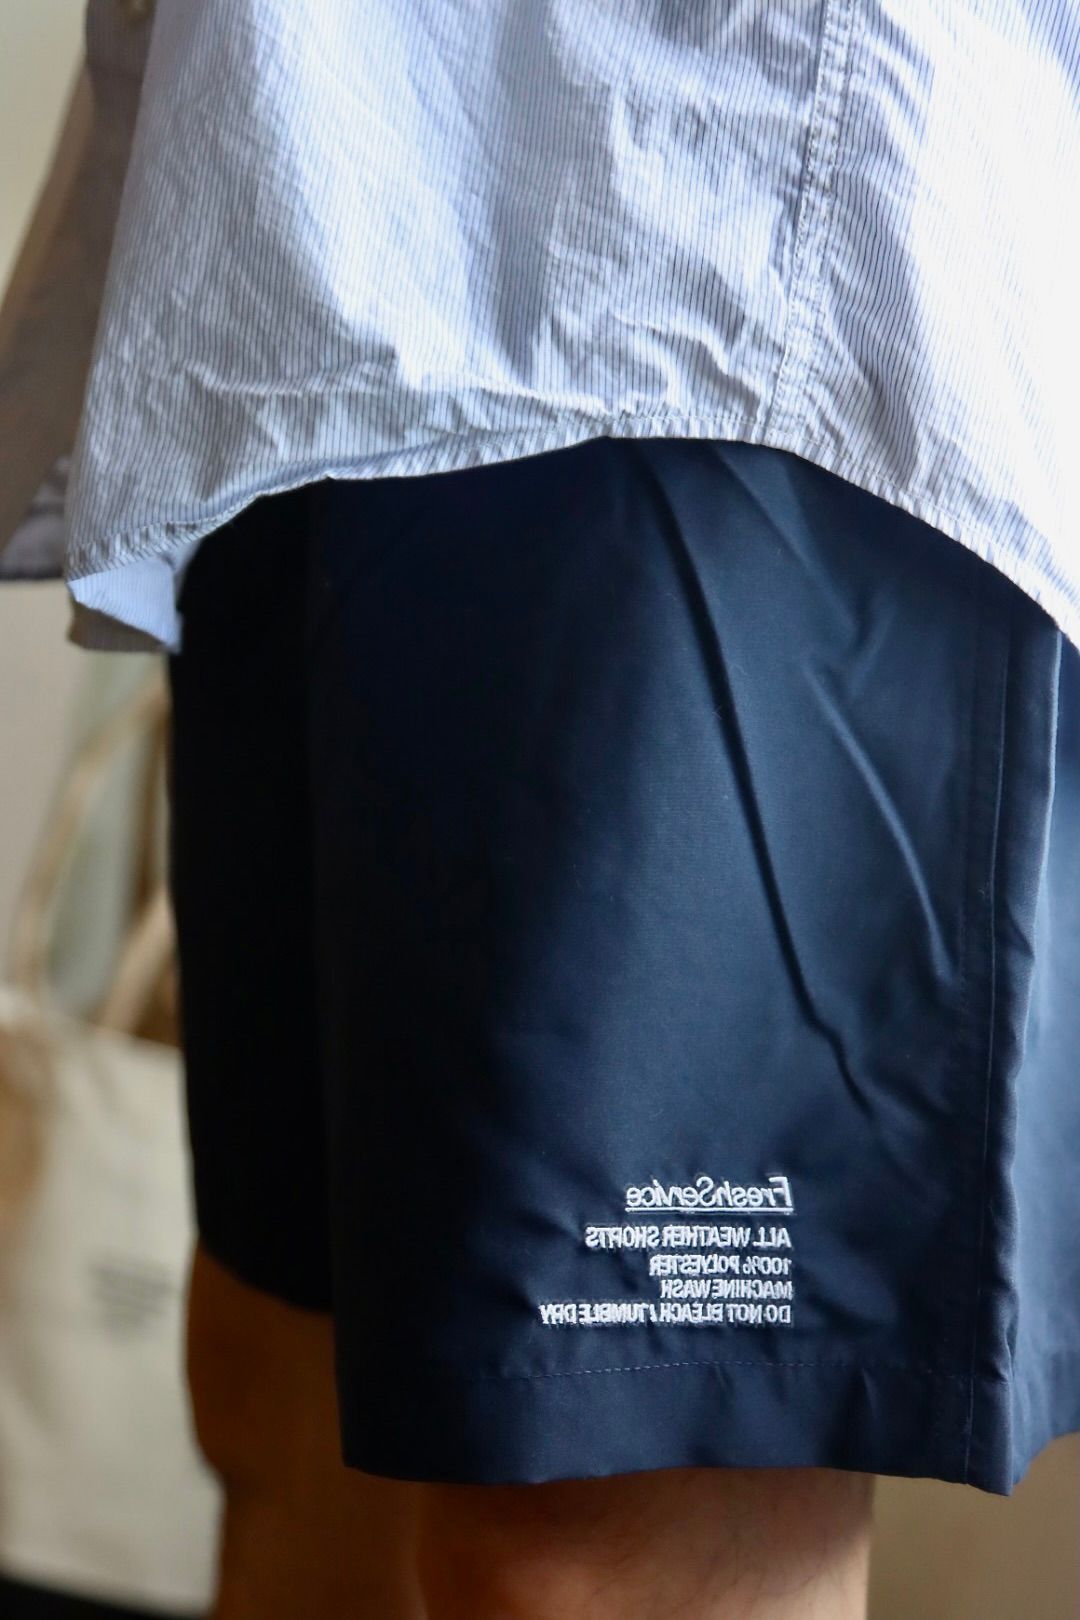 freshservice ALL WEATHER SHORTS